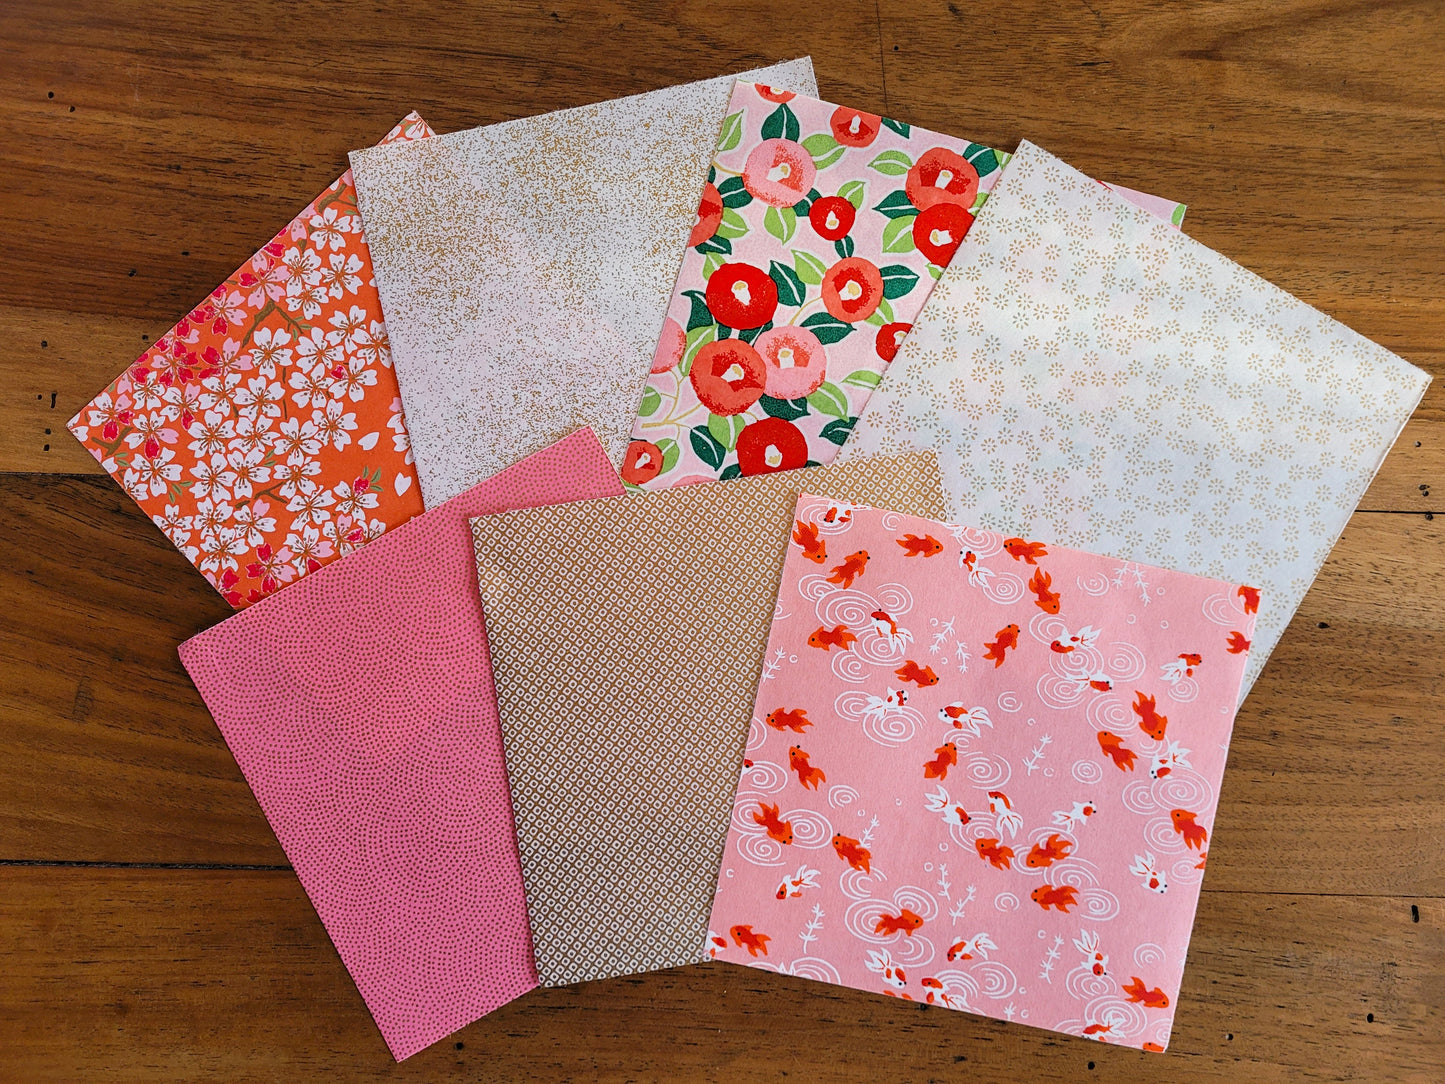 Kit of 7 Japanese origami papers - "Camellia" - Pink, coral, gold